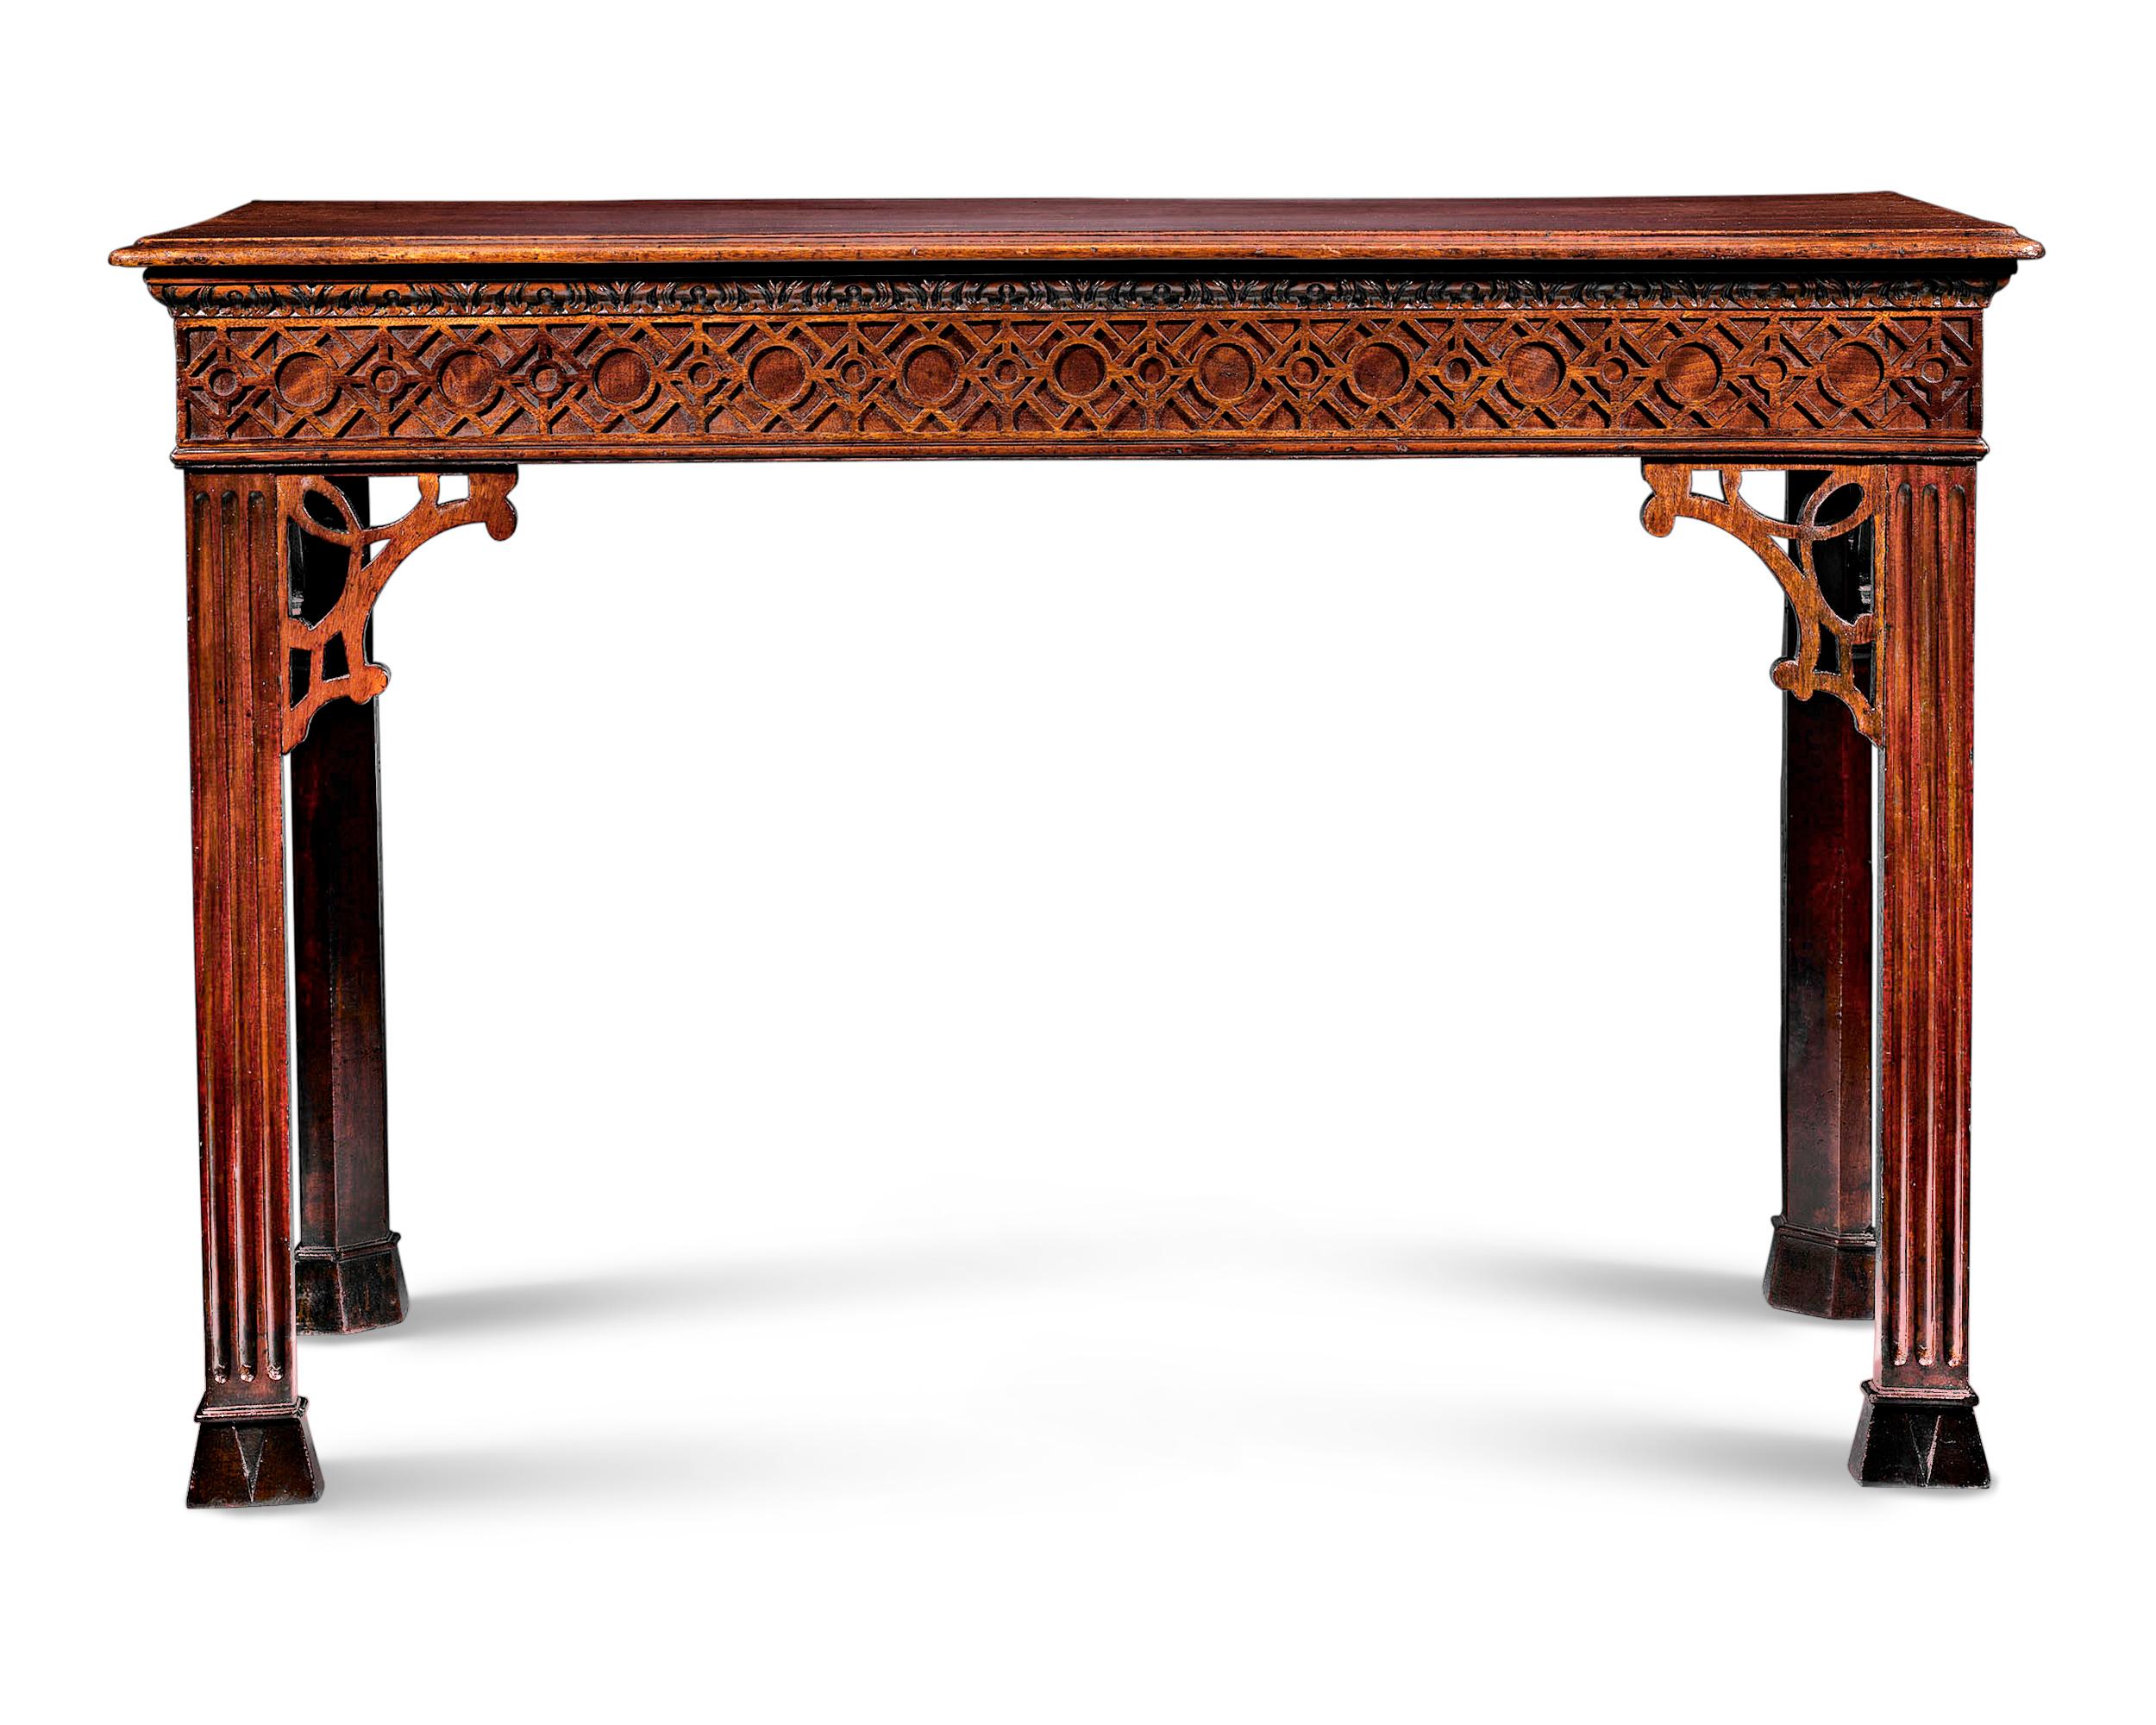 This English mahogany console table is a rare period example of the elaborate Chinese Chippendale style. A study in symmetry and balance, this table combines the restrained elegance of the Georgian period with the intricate artistry of the